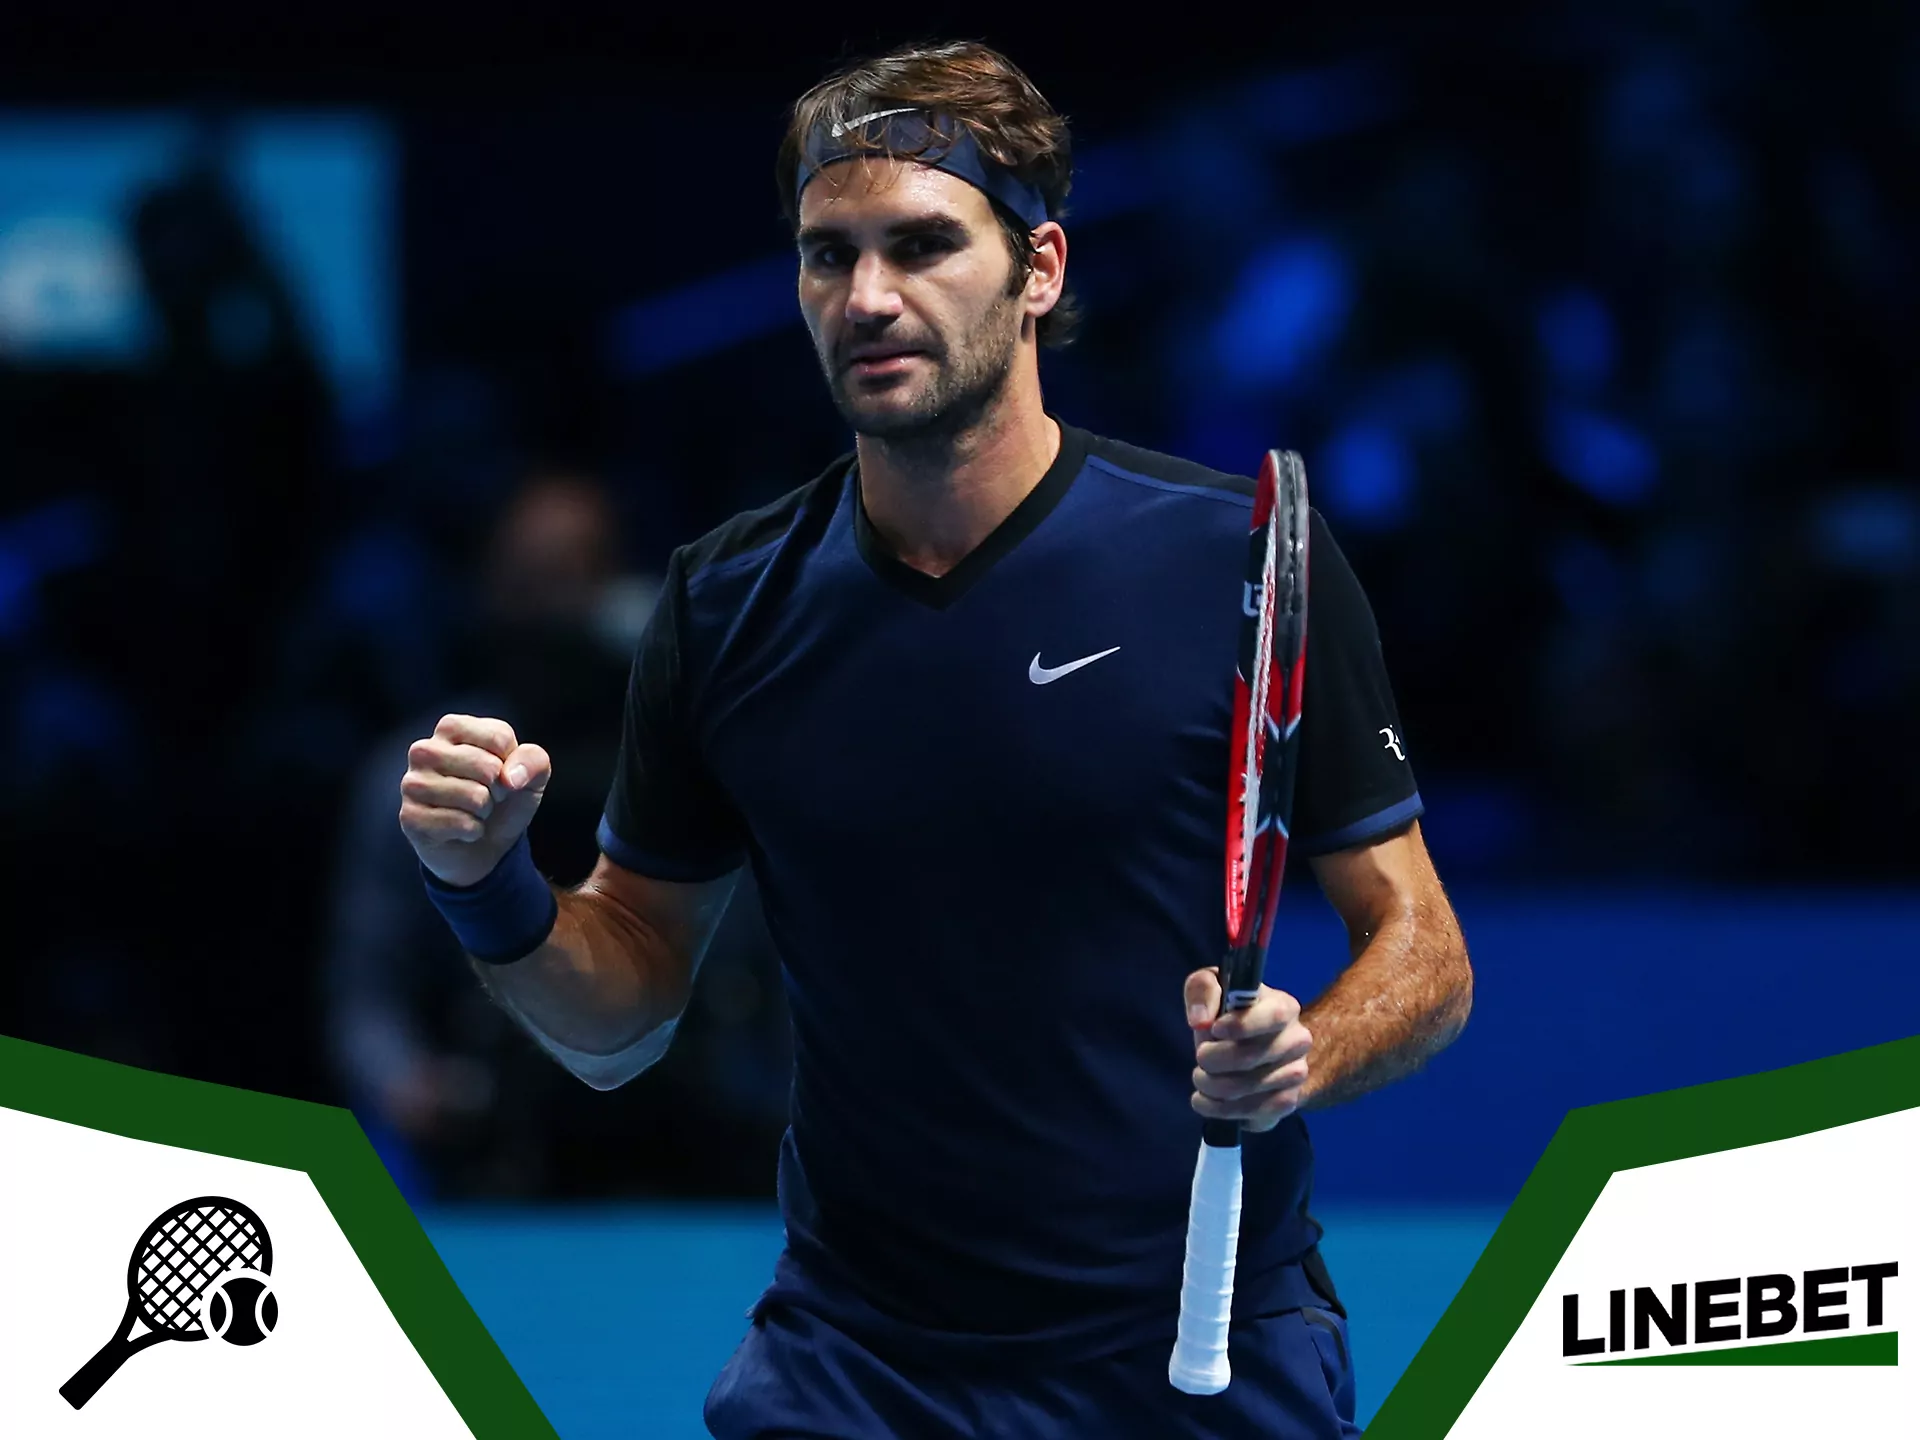 Bet on the best tennis player at Linebet.